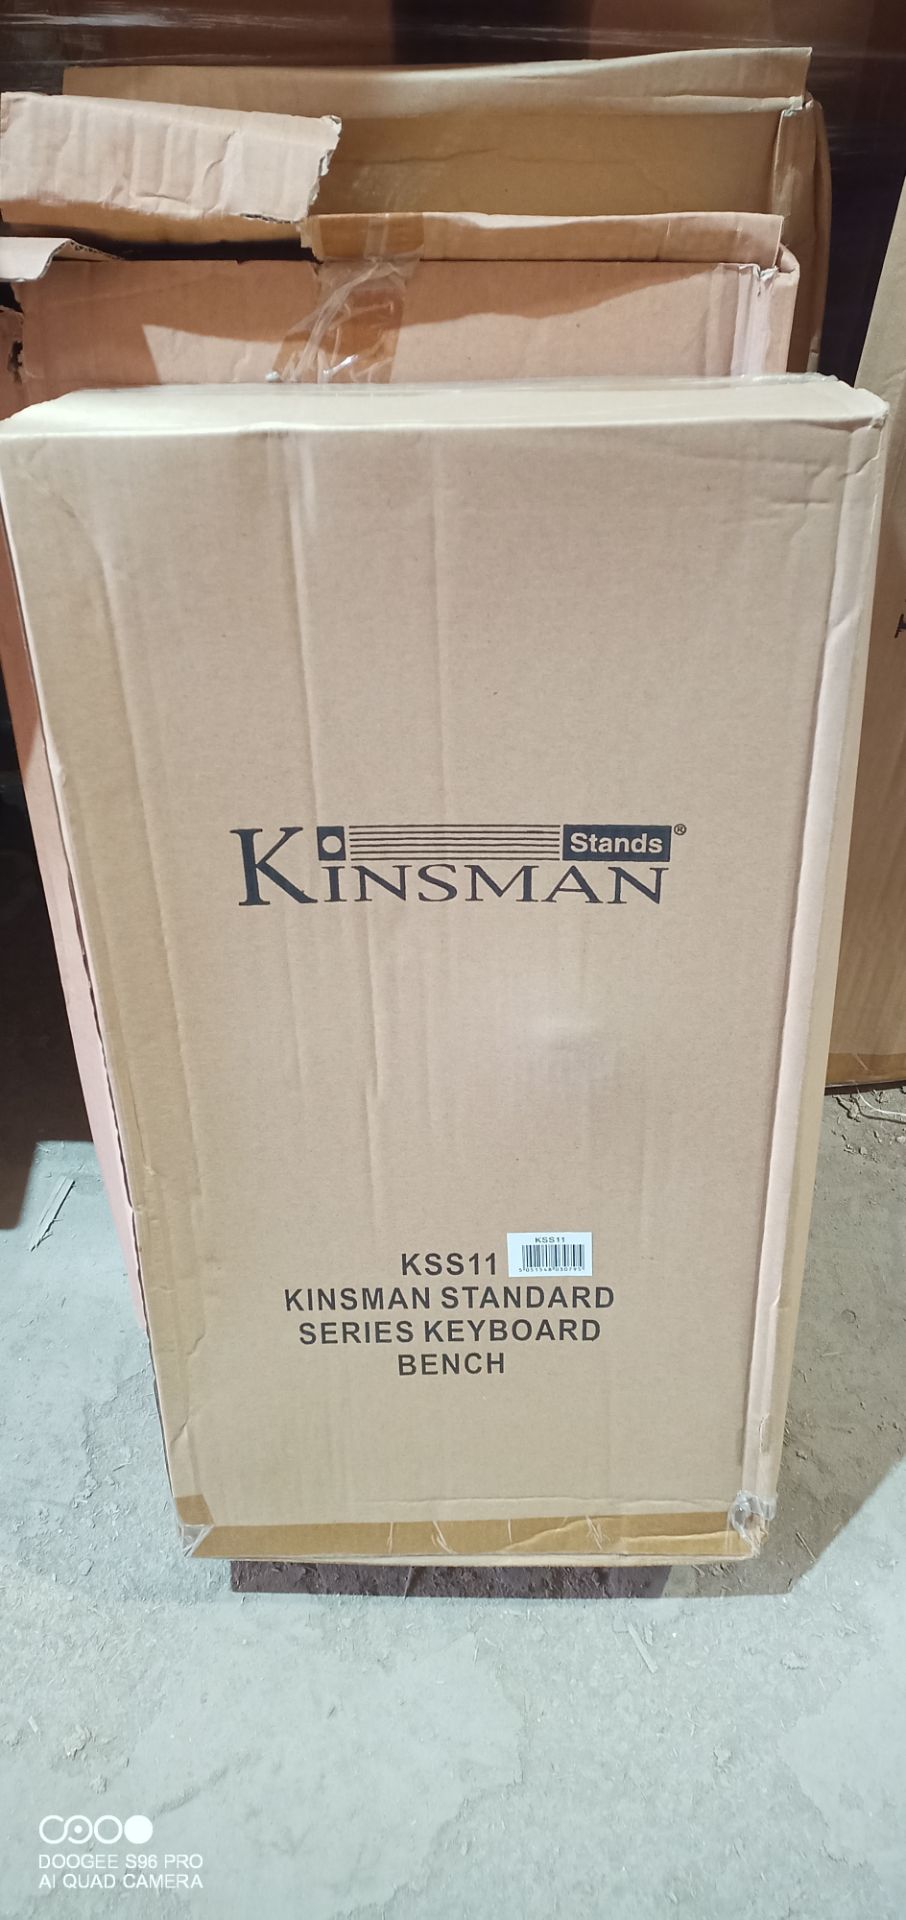 3 Kinsman stands as pictured look unused possible damage packaging